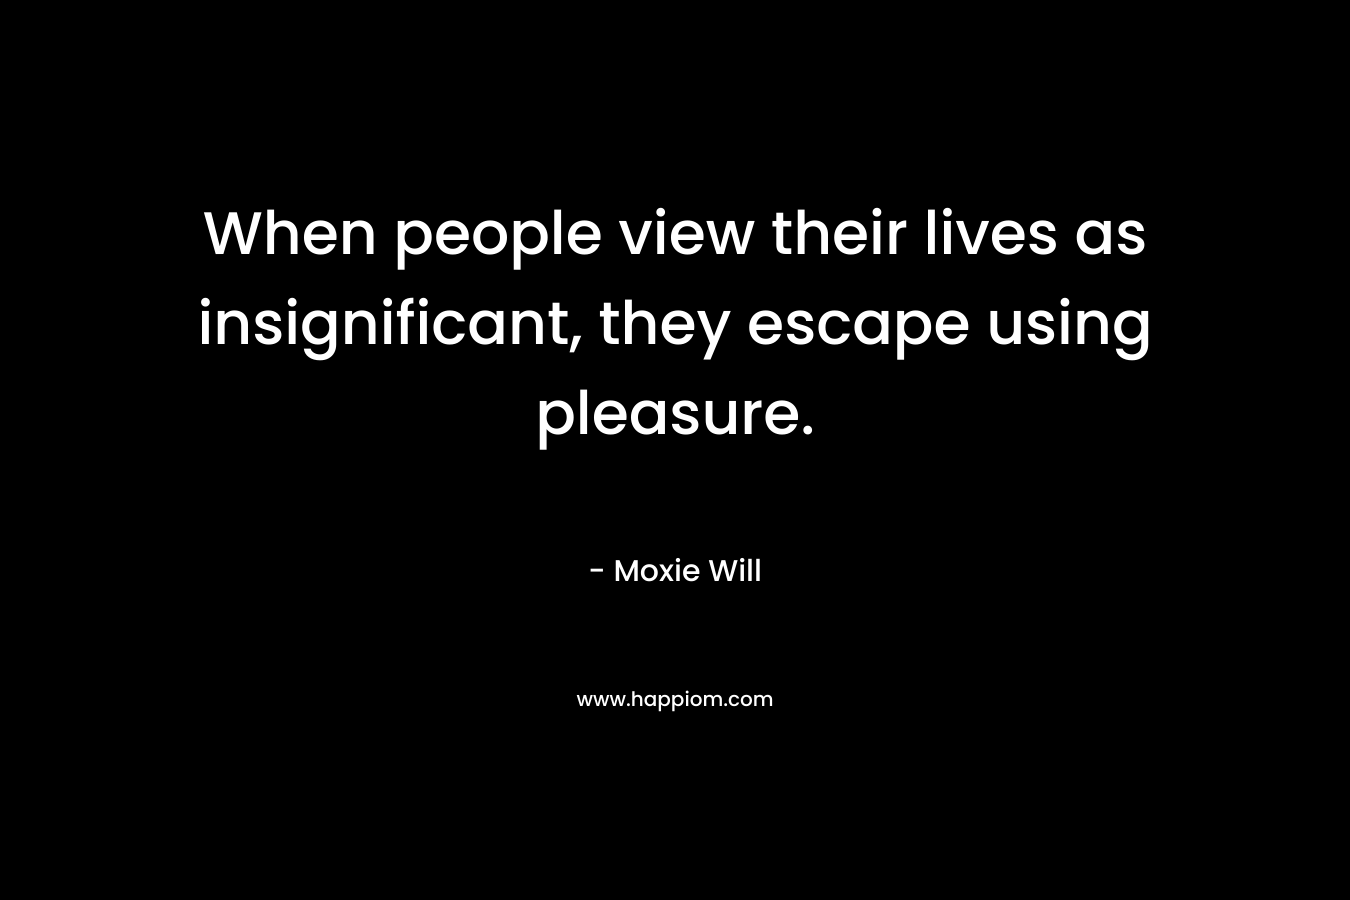 When people view their lives as insignificant, they escape using pleasure.